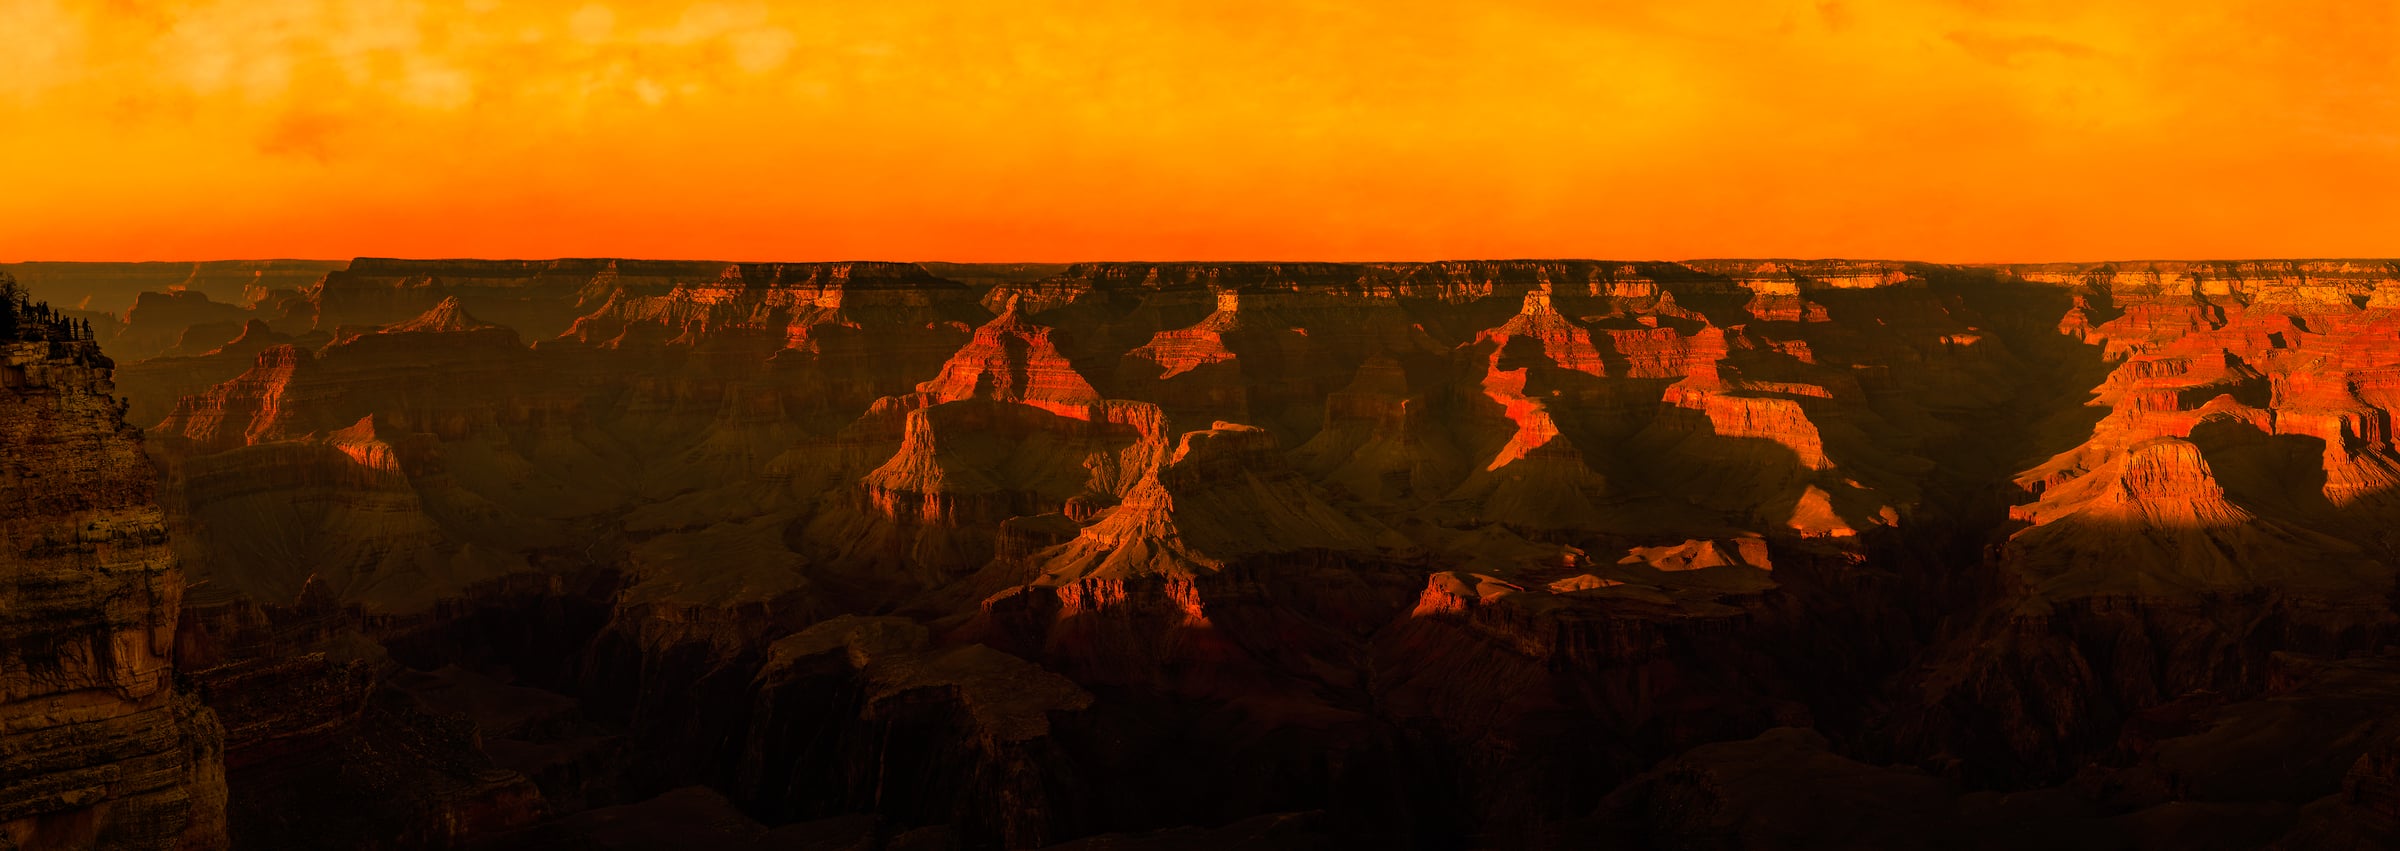 276 megapixels! A very high resolution, large-format VAST photo print of a dramatic sunset at the Grand Canyon; photograph created by David David at Yavapai Point in Grand Canyon National Park, Arizona.